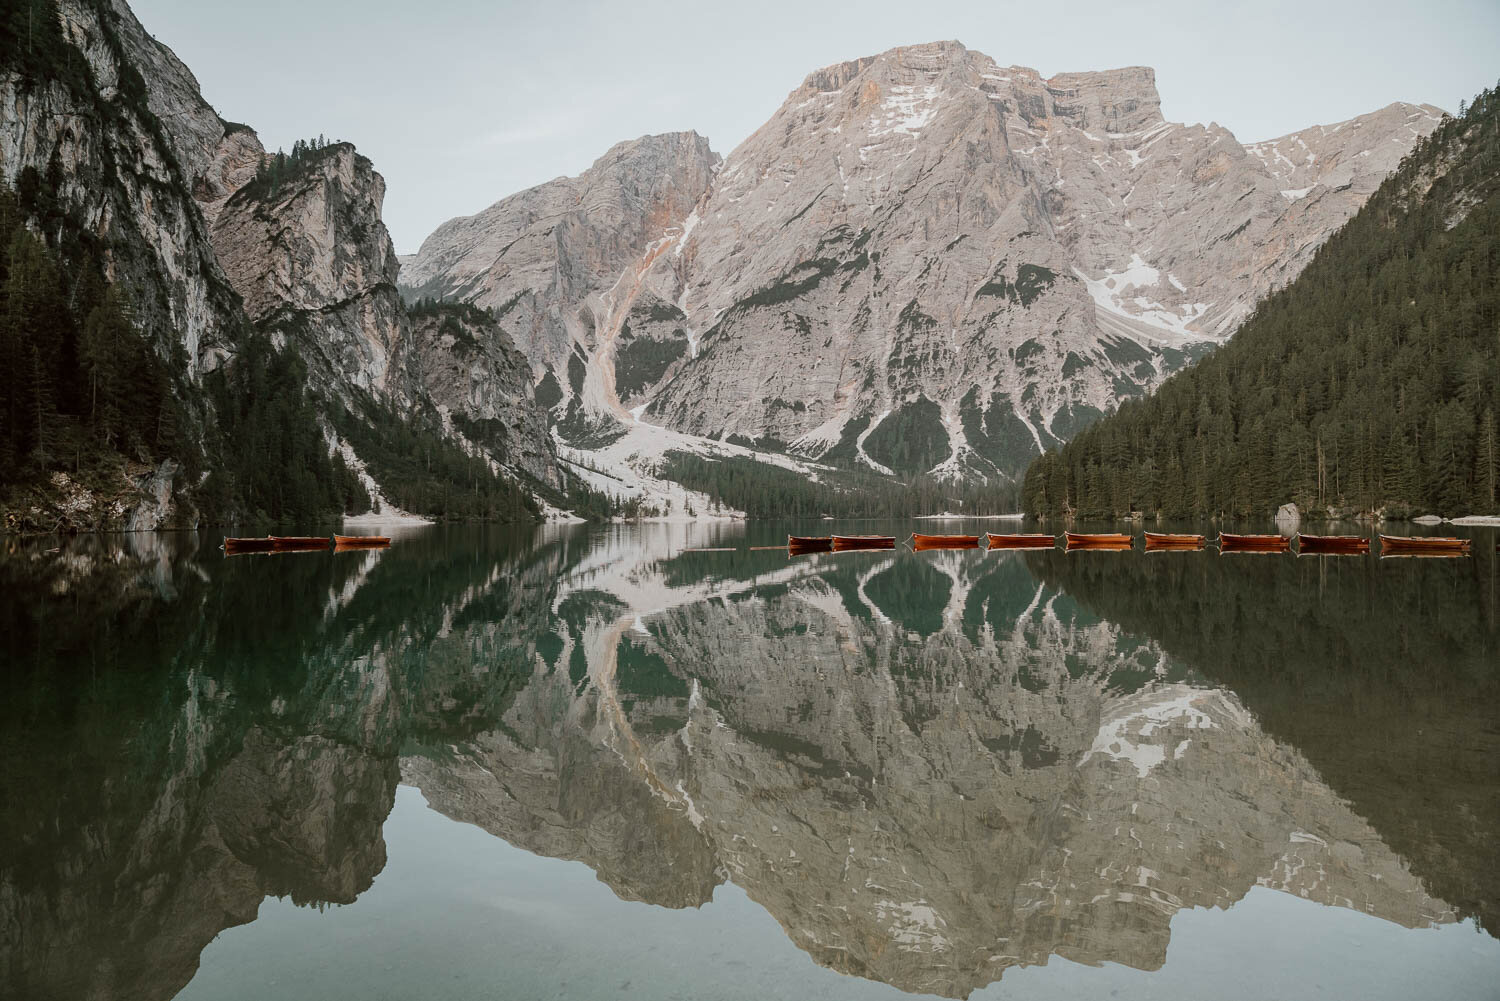 Why is the Lago di Braies called the Most Spectacular Alpine Lake in the World?